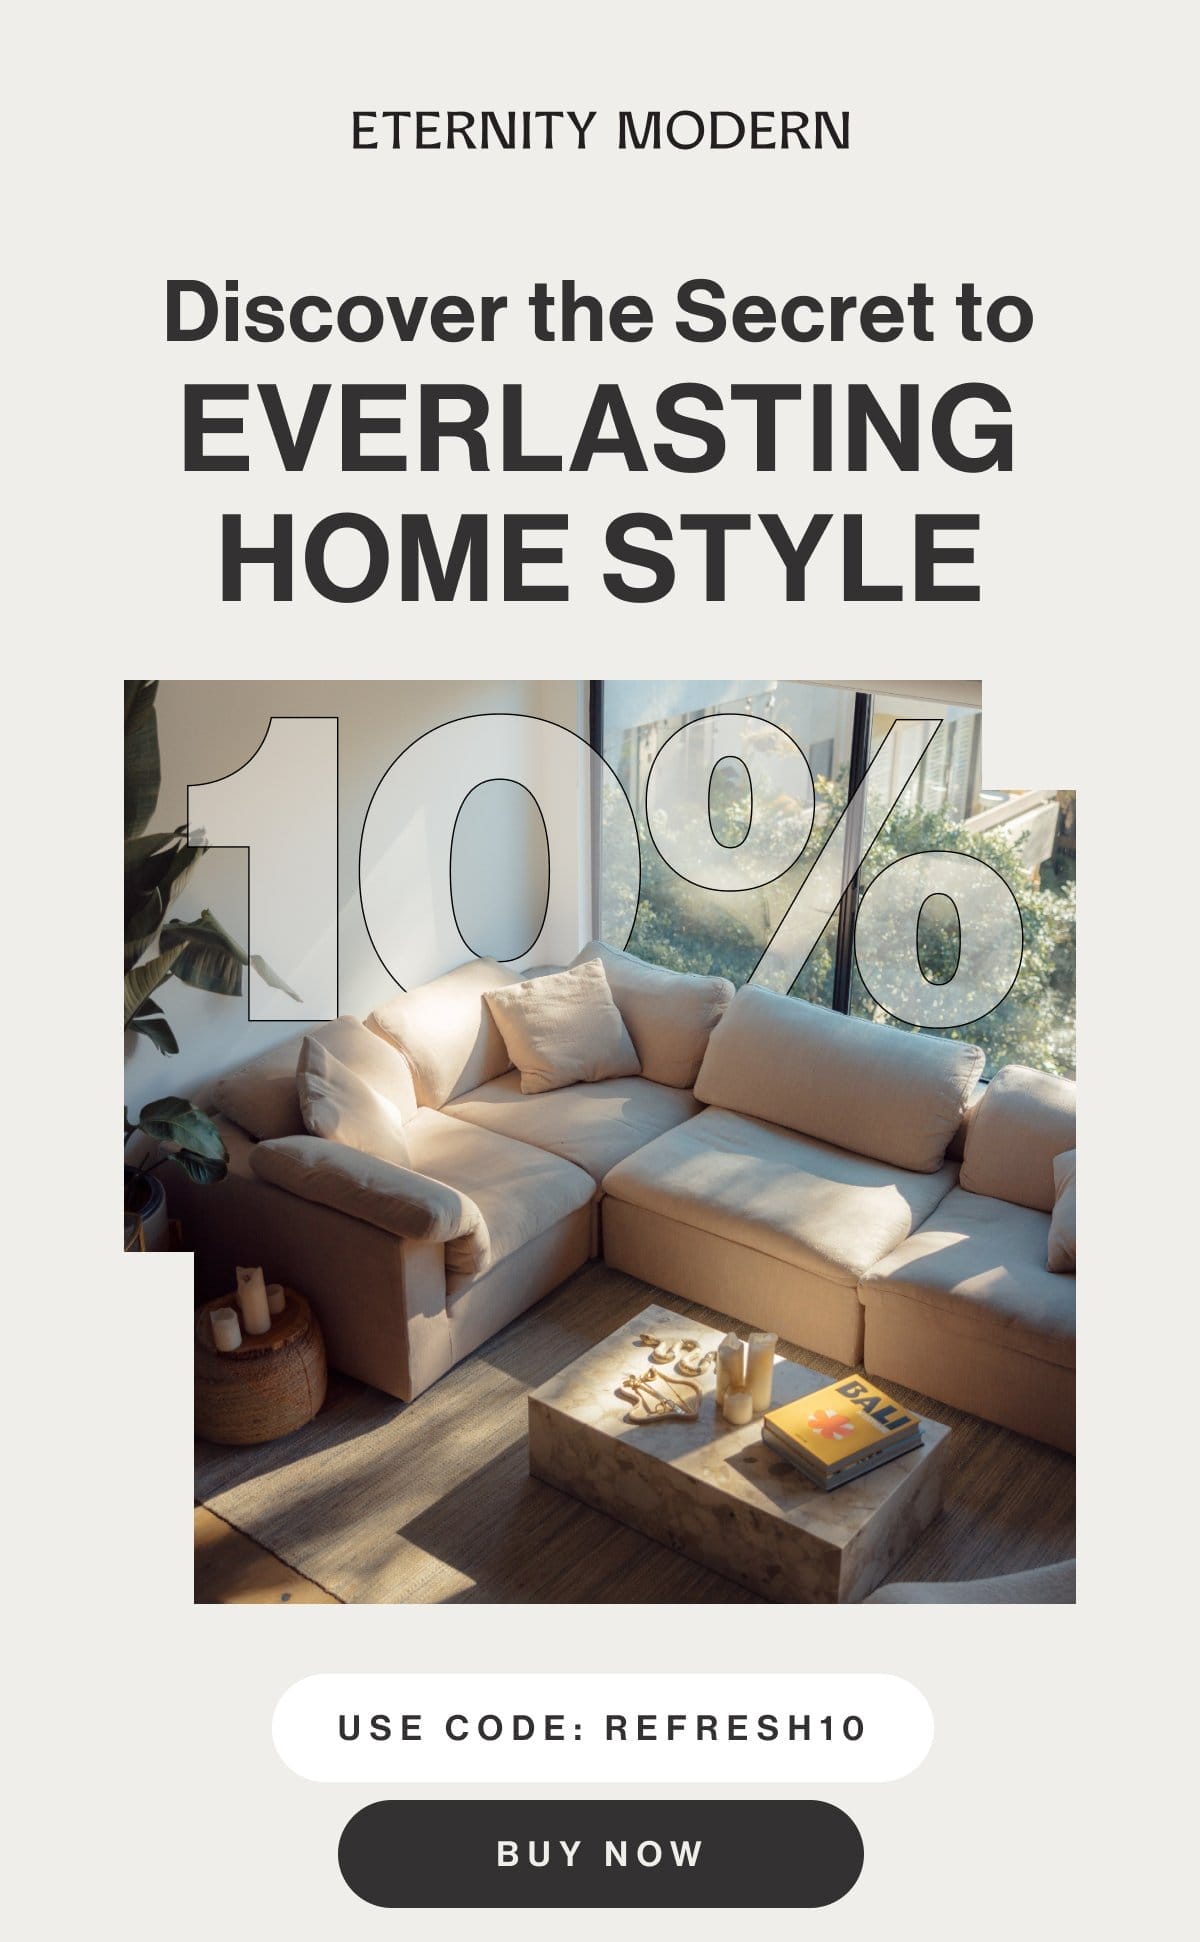 Discover the Secret to Everlasting Home Style - Use code: REFRESH10 - Buy Now